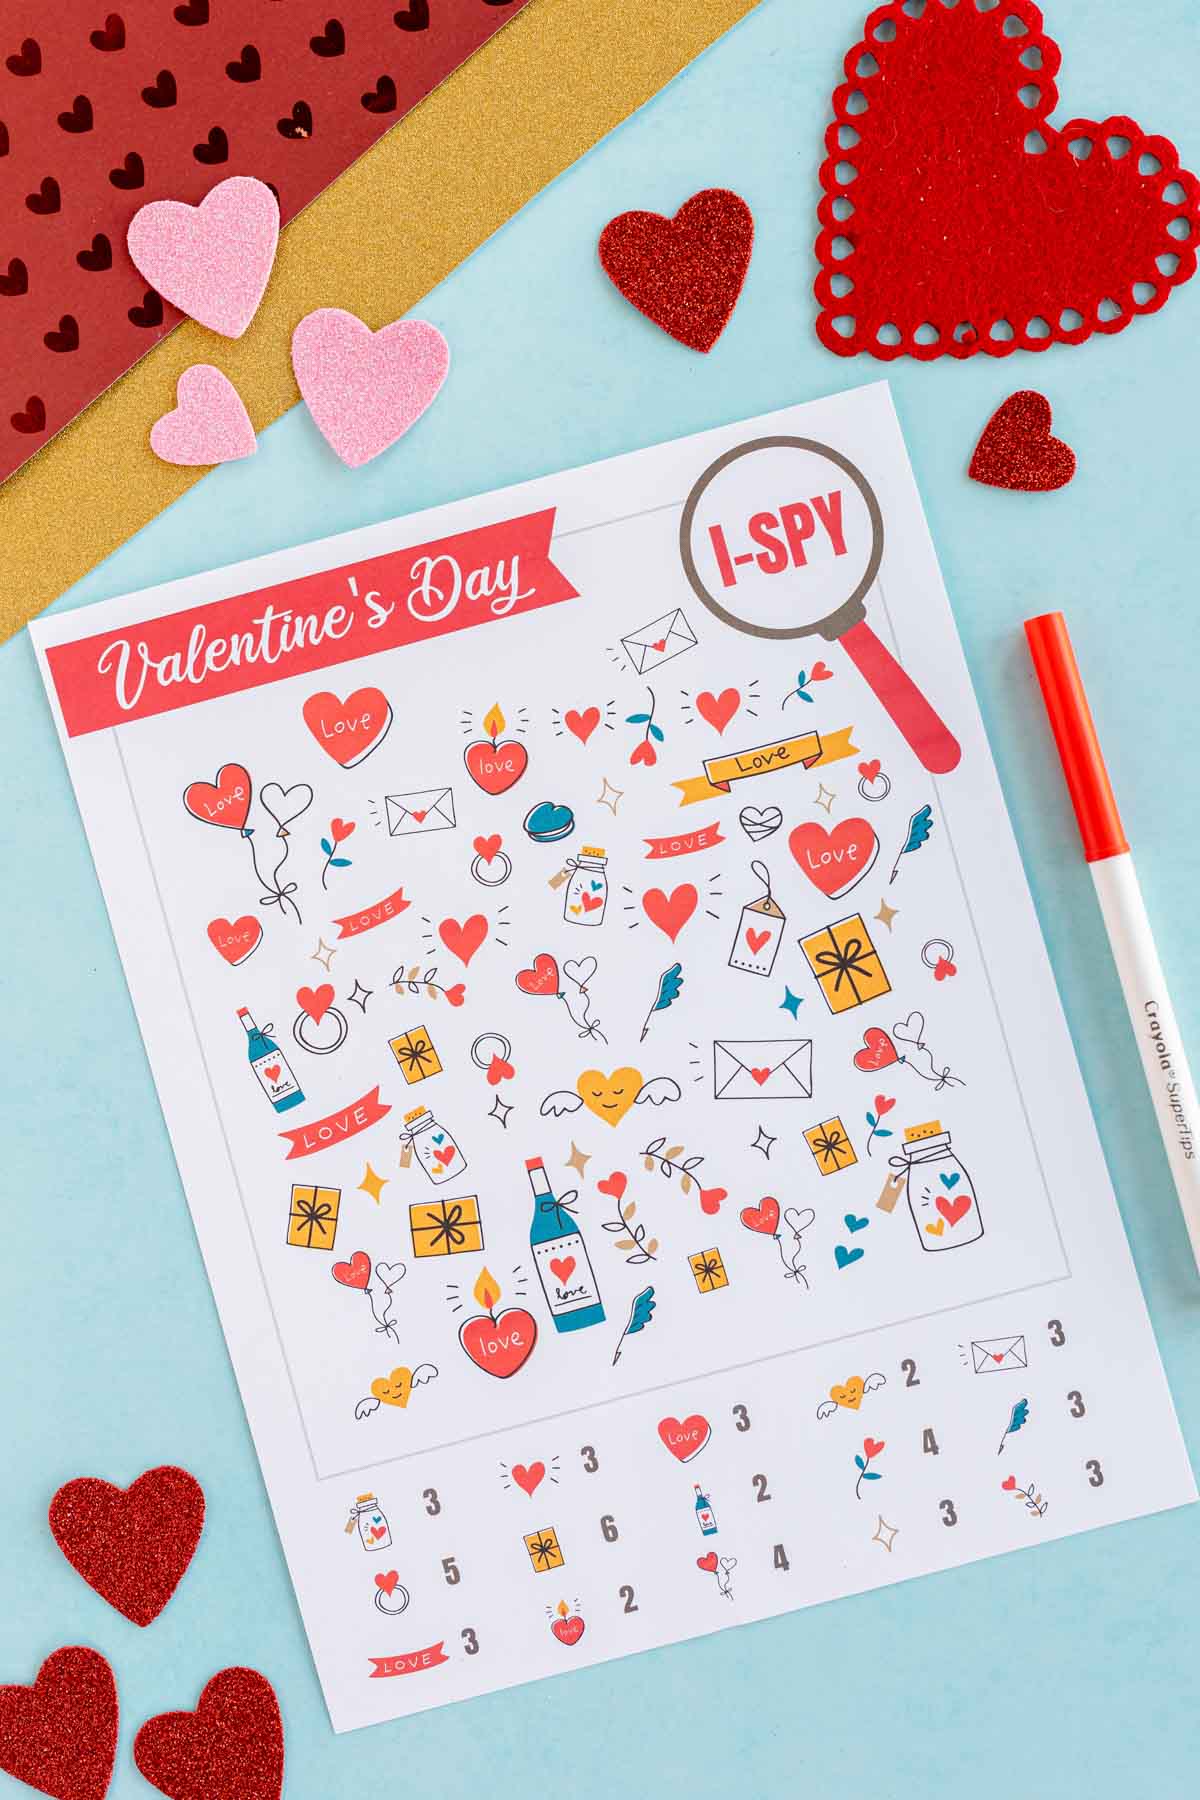 printed out Valentines i spy sheet with hearts around it